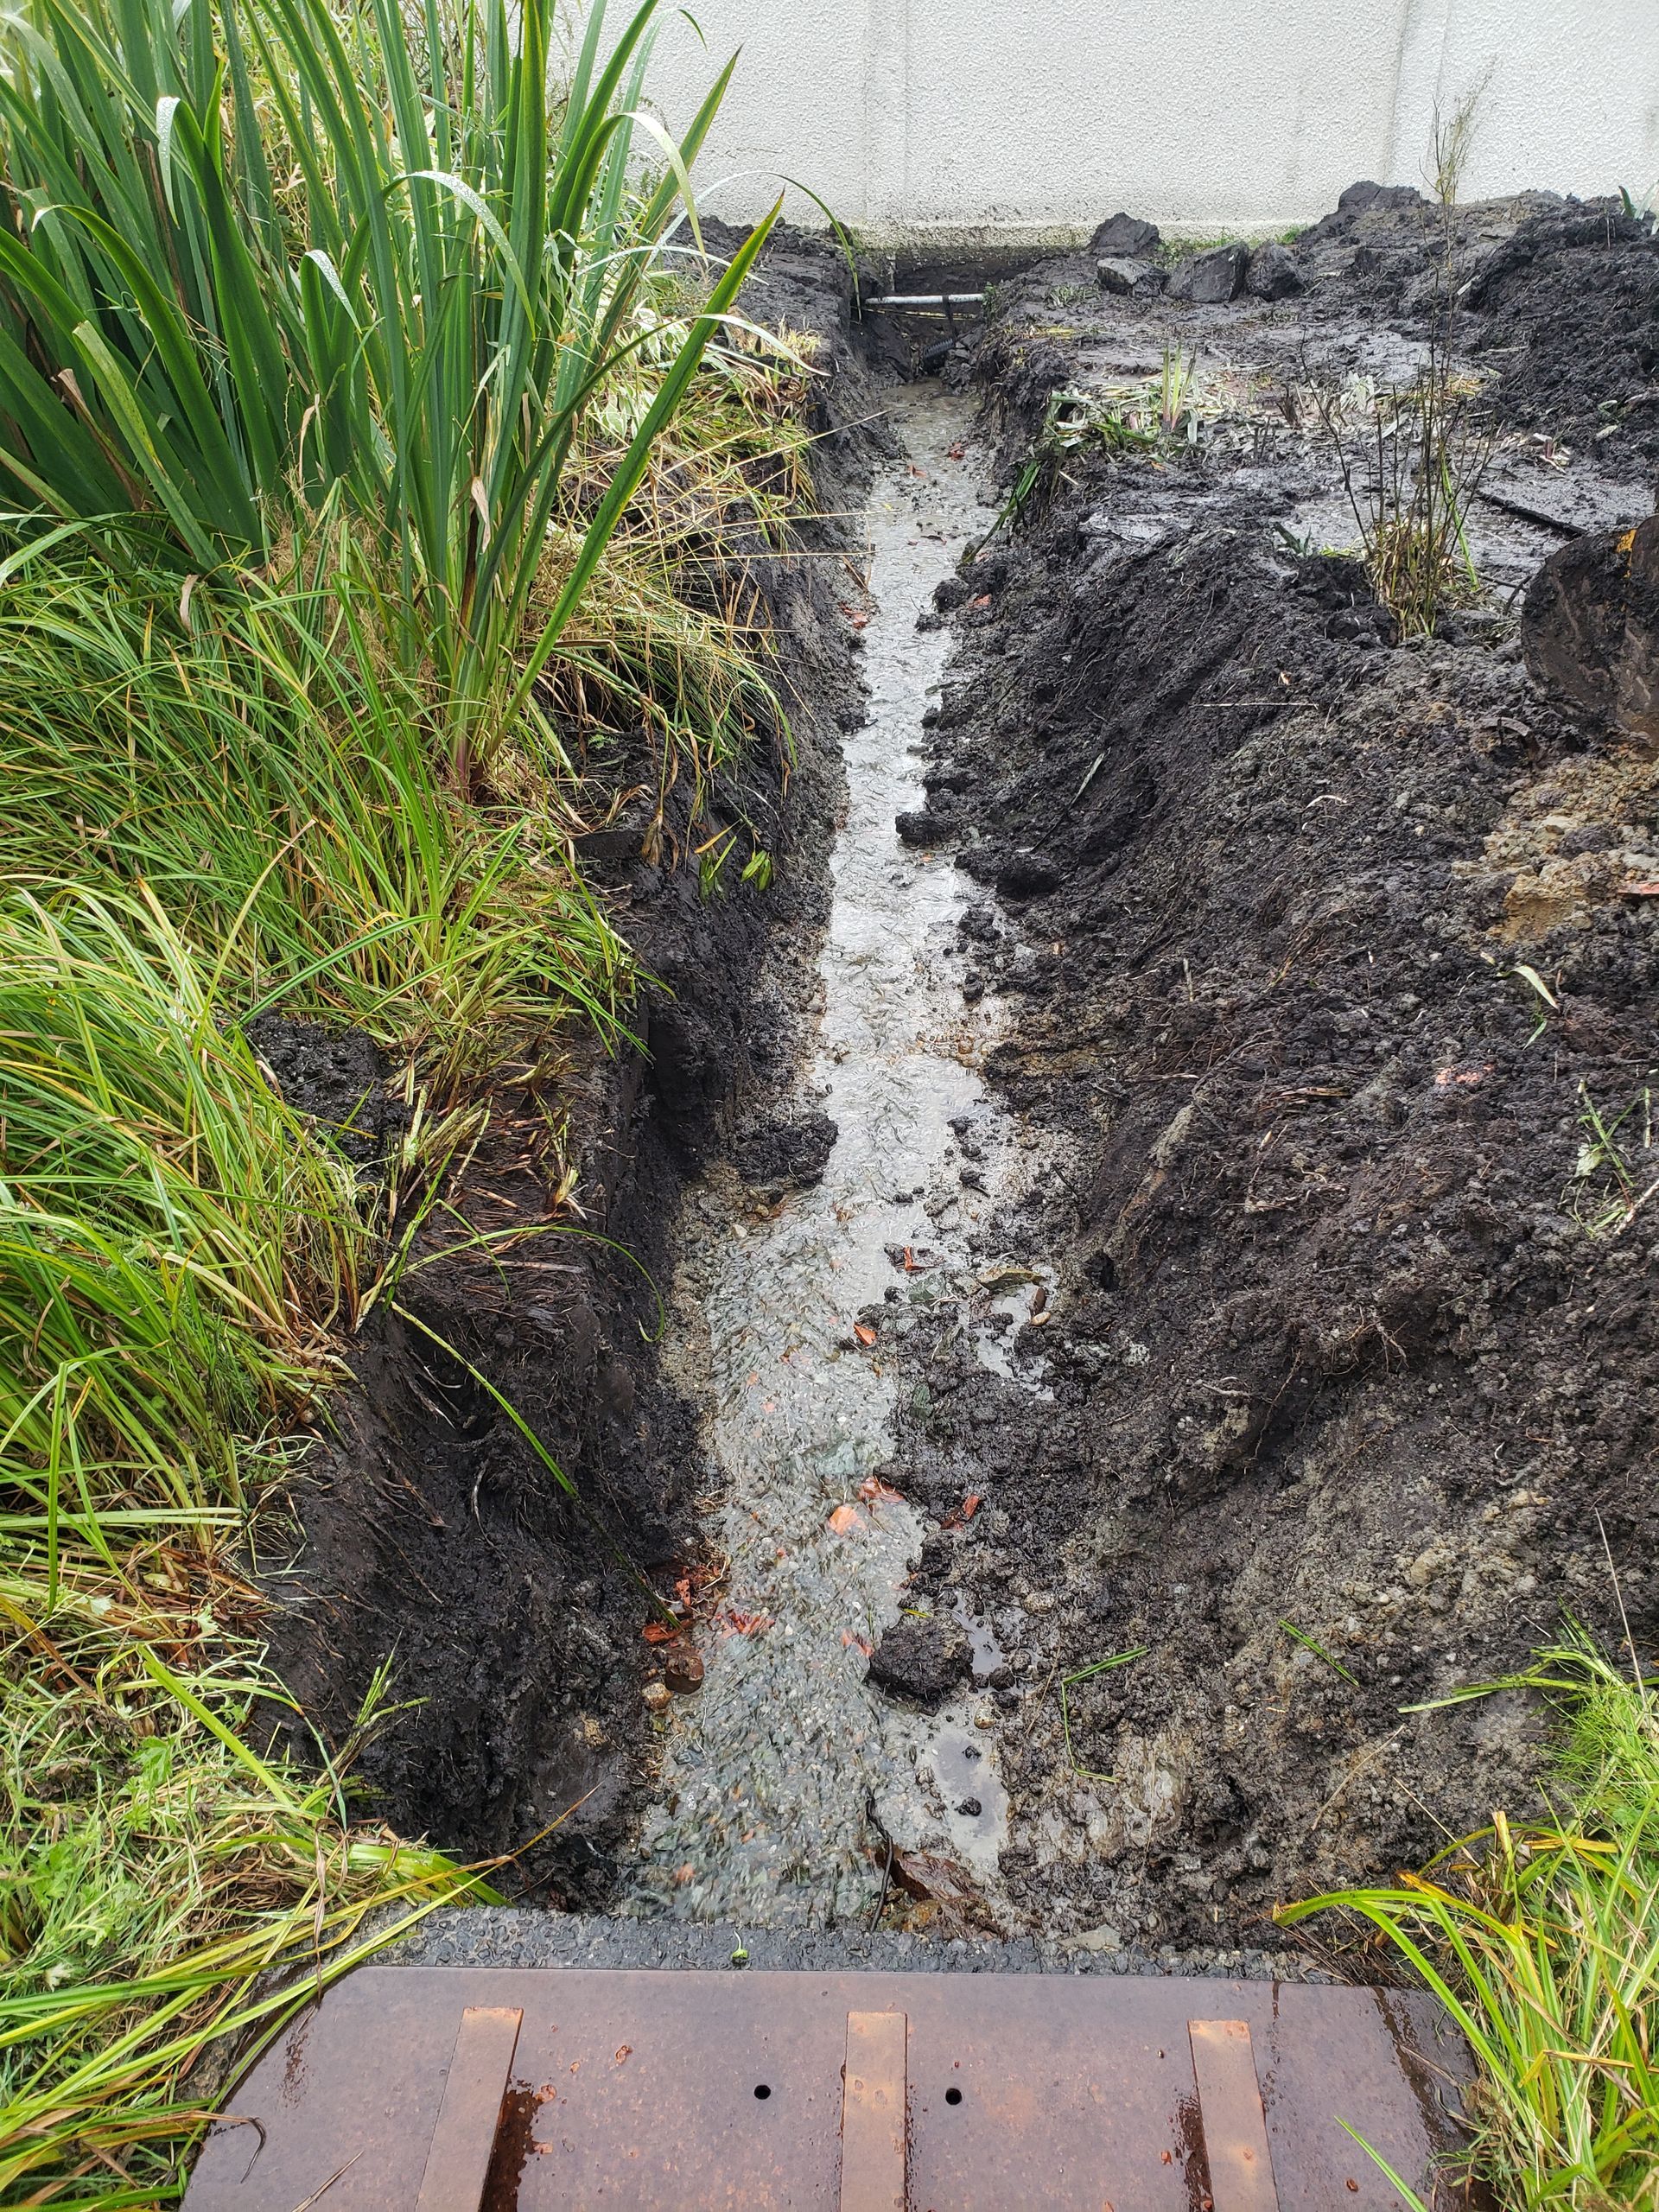 image of new drain being installed in Nanaimo BC by RainTek